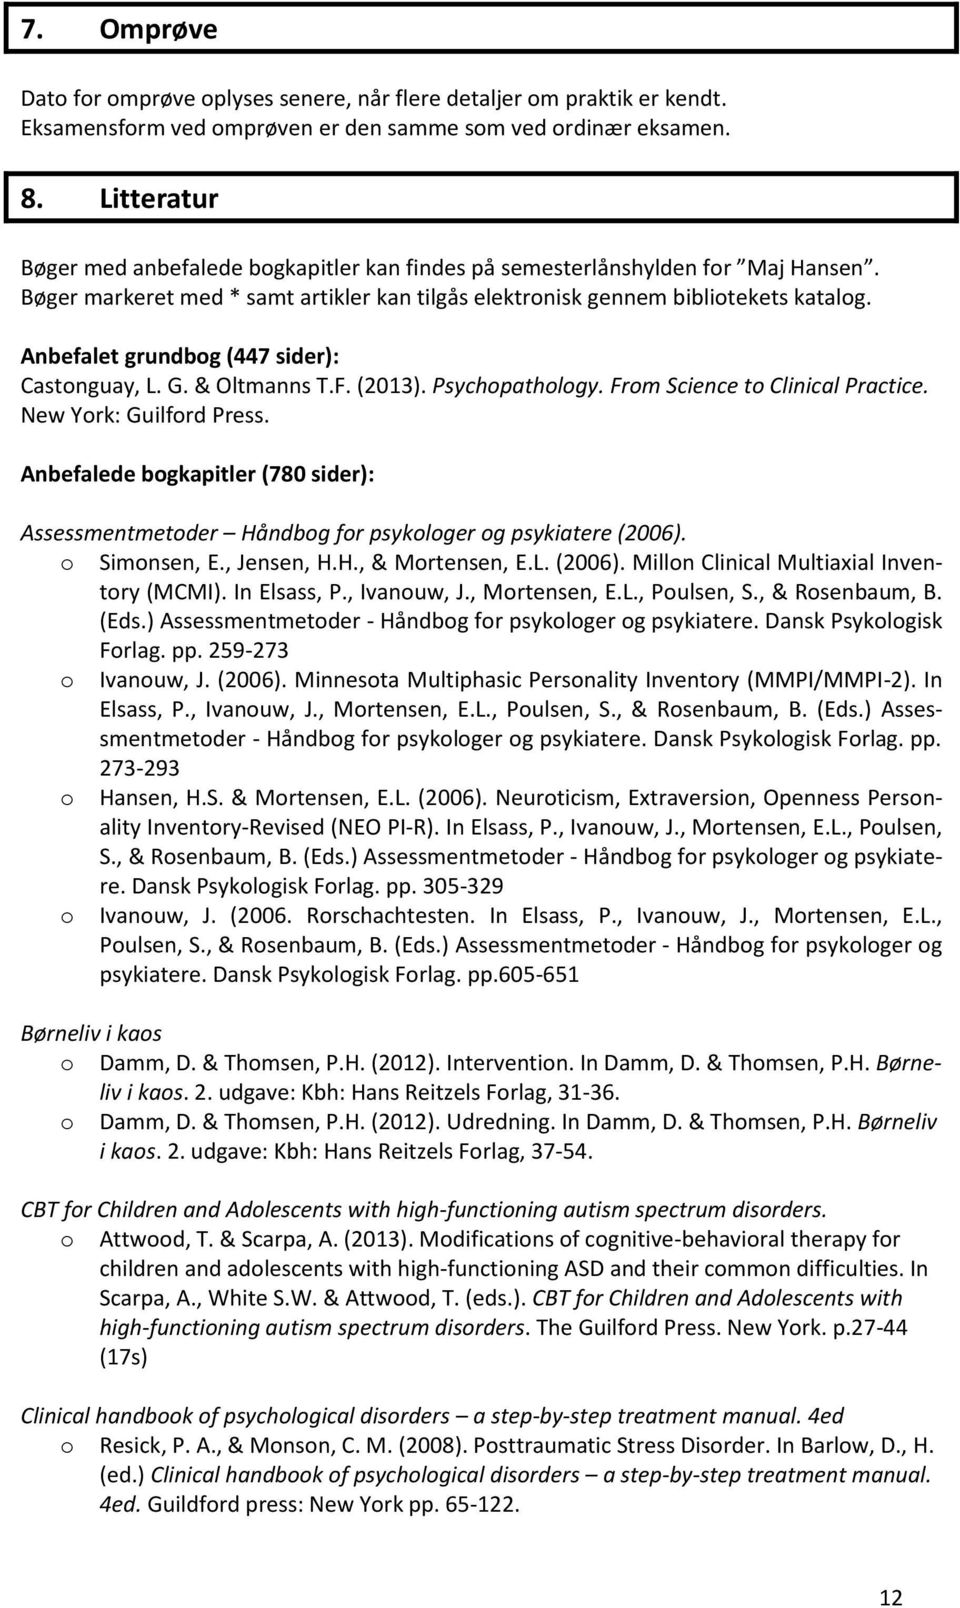 Anbefalet grundbog (447 sider): Castonguay, L. G. & Oltmanns T.F. (2013). Psychopathology. From Science to Clinical Practice. New York: Guilford Press.